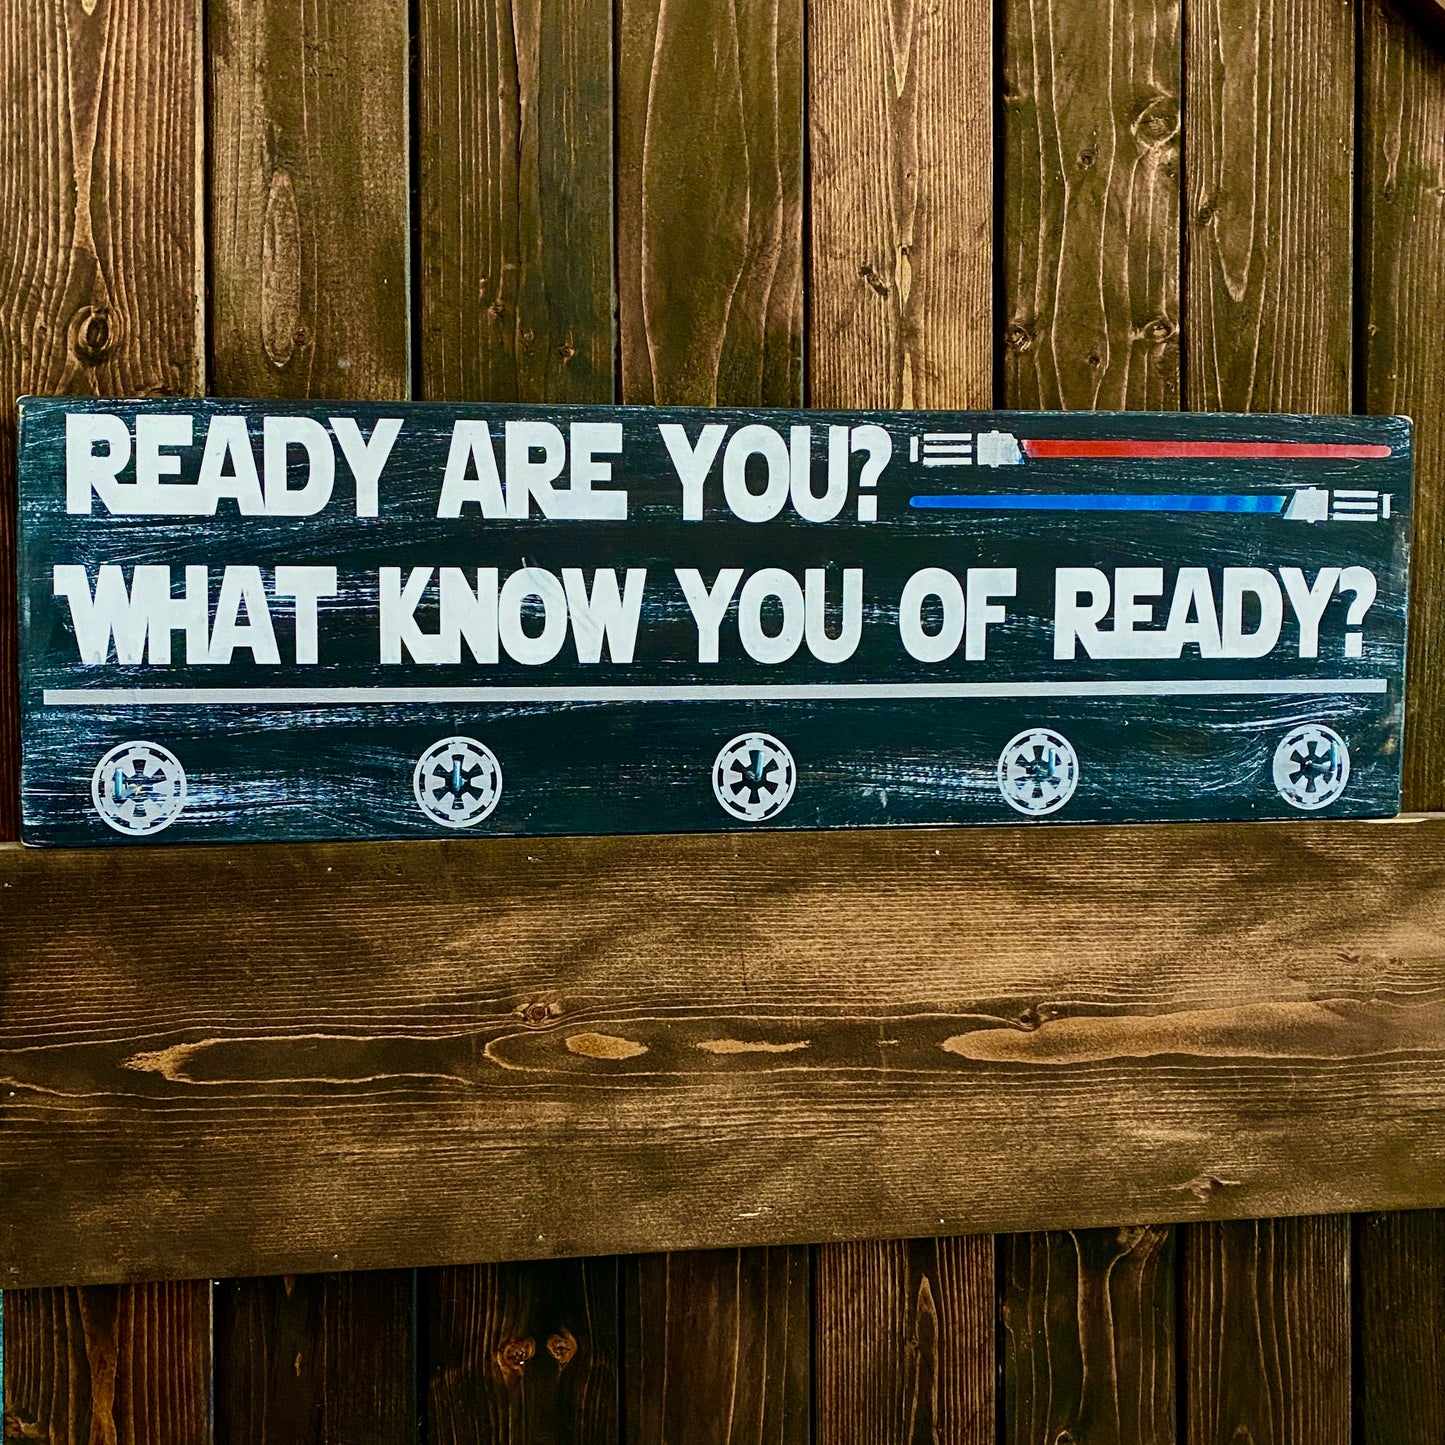 Ready Are You? What you Know of Ready: Medal Holder - Paisley Grace Makery